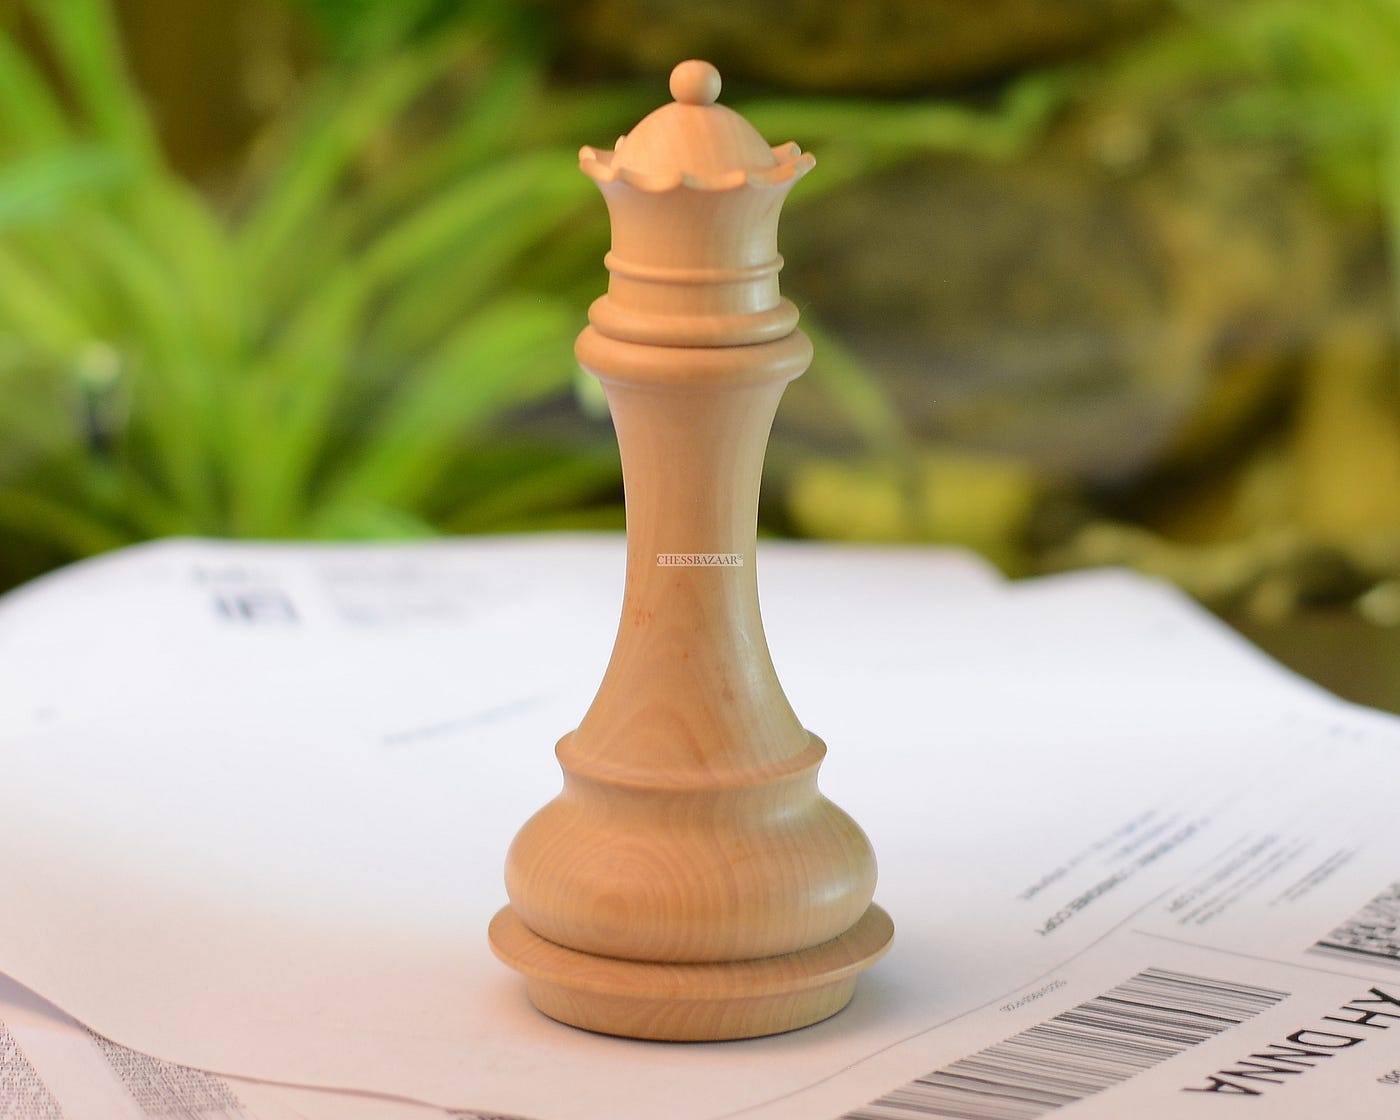 StartUp Chess. Having finally had the opportunity to…, by Dr. Mussaad M.  Al-Razouki